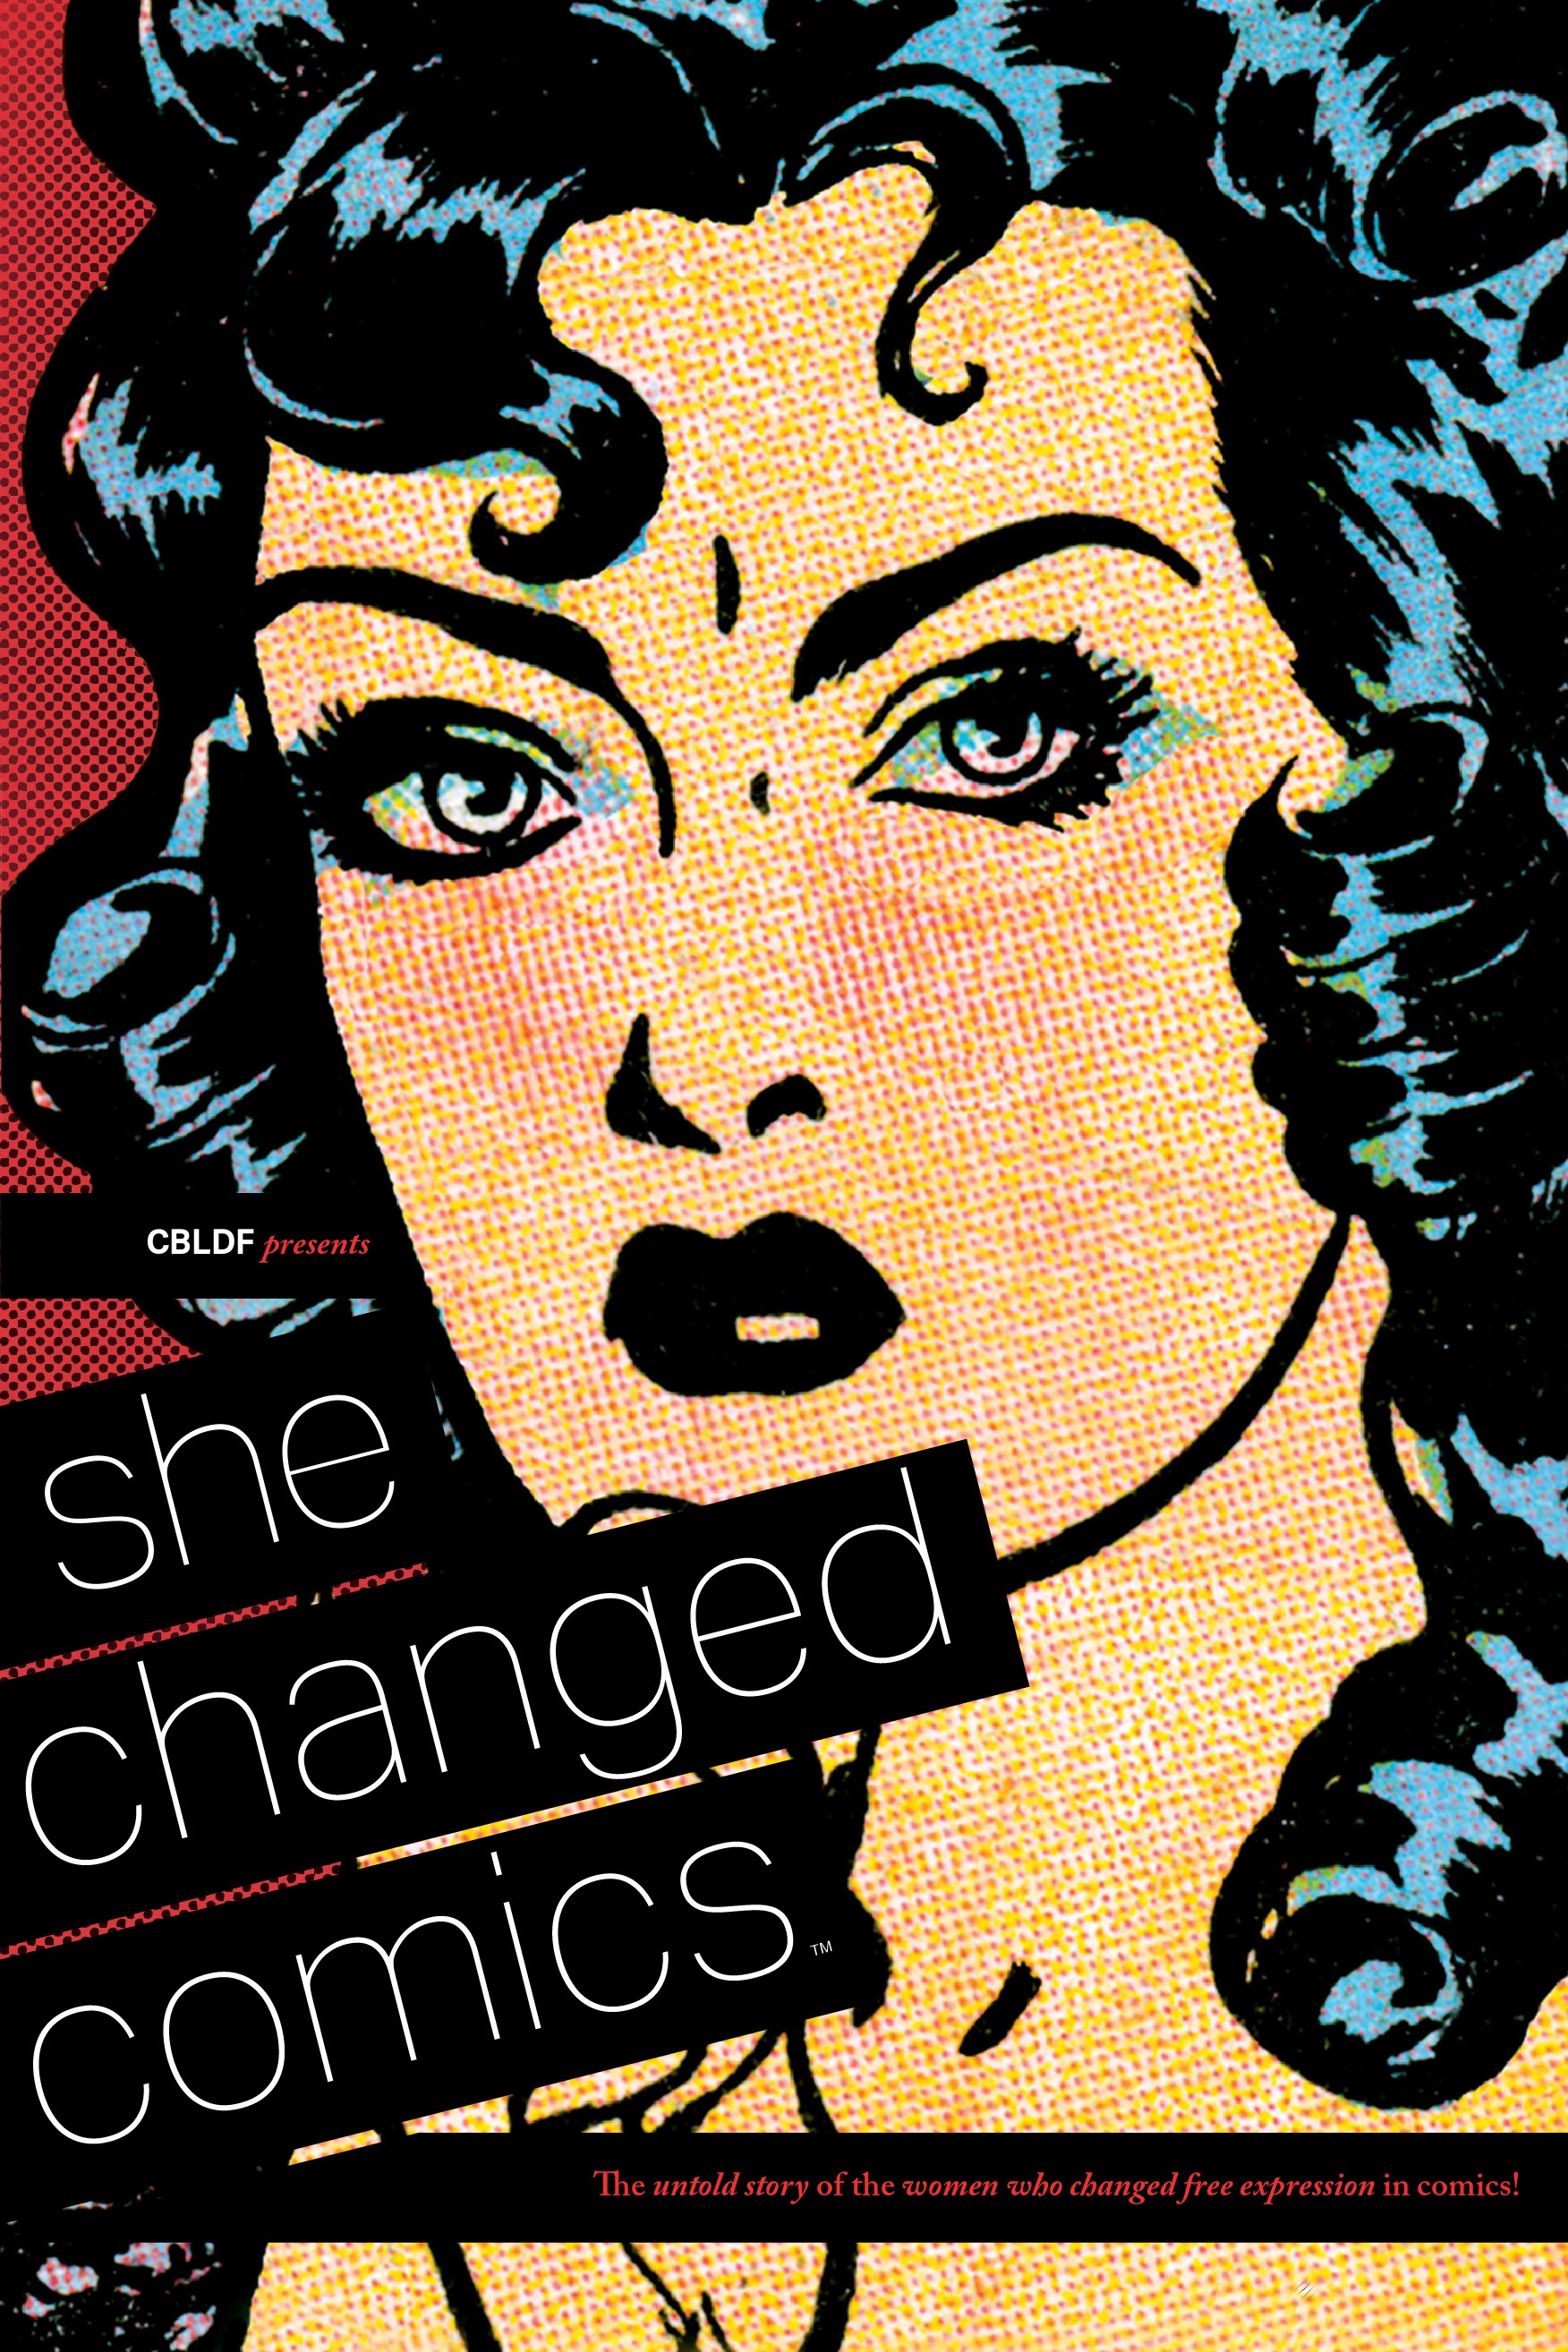 Read online CBLDF Presents: She Changed Comics comic -  Issue # TPB (Part 1) - 1